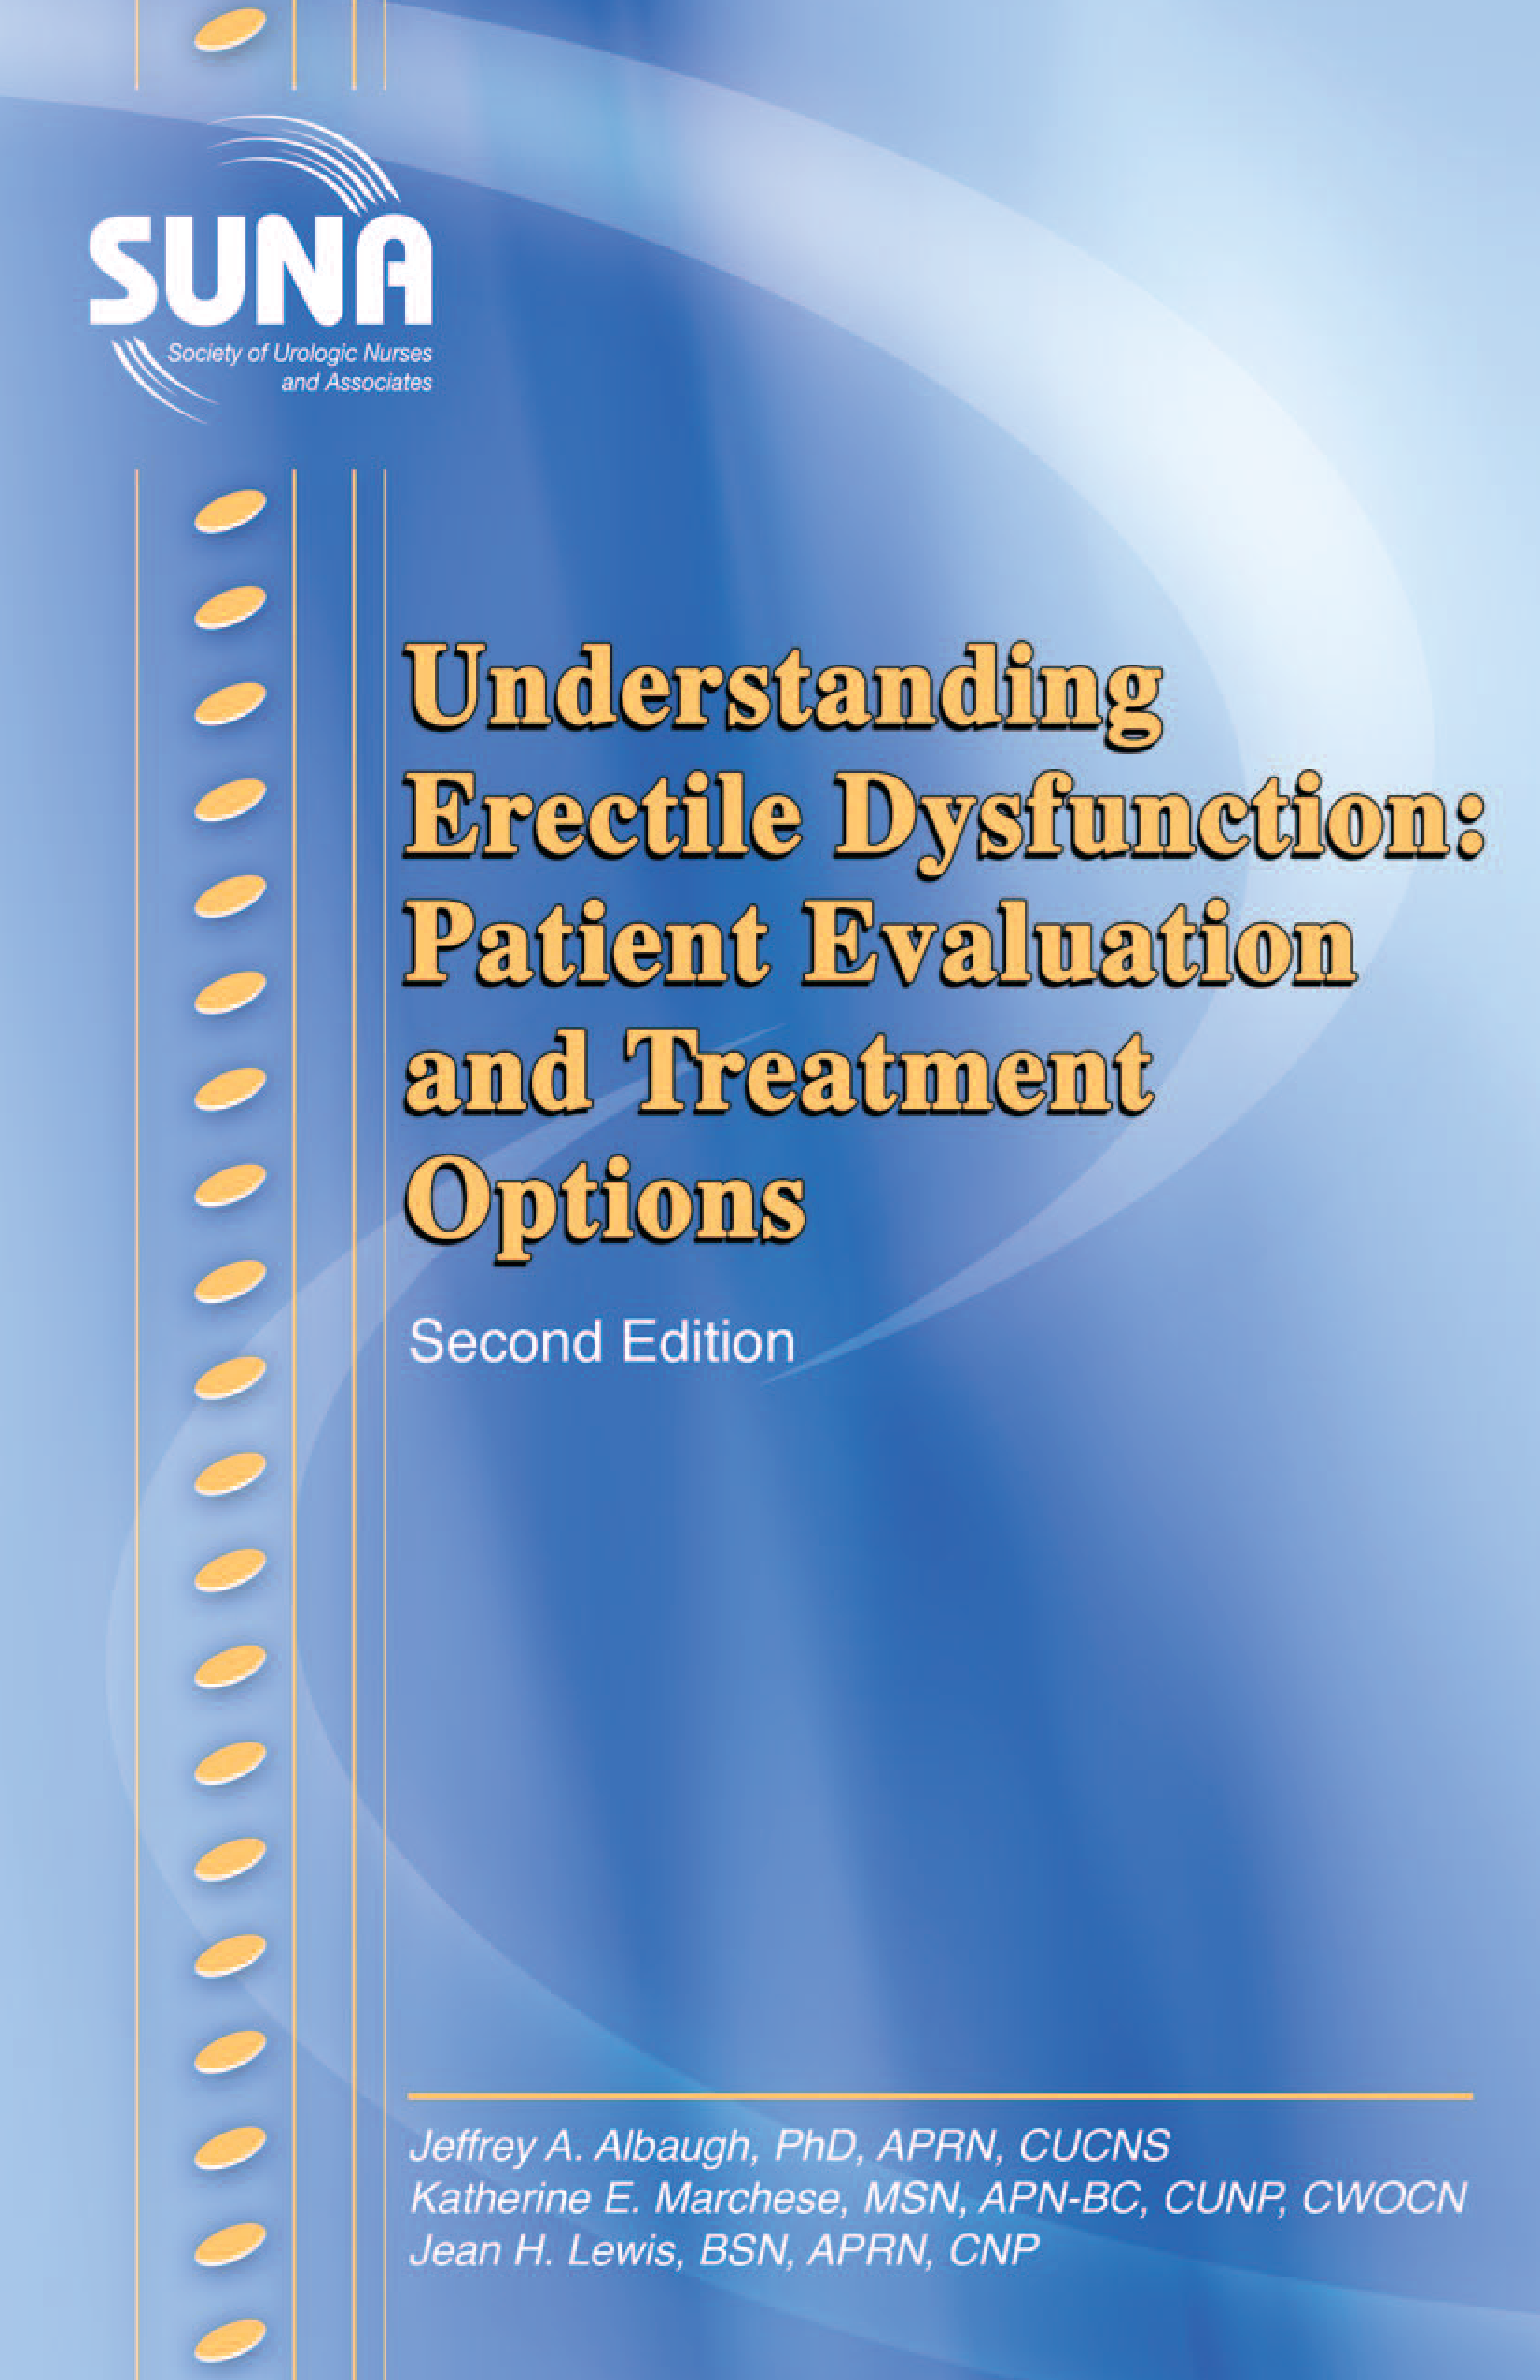 Understanding Erectile Dysfunction: Patient Evaluation and Treatment Options, 2nd Edition